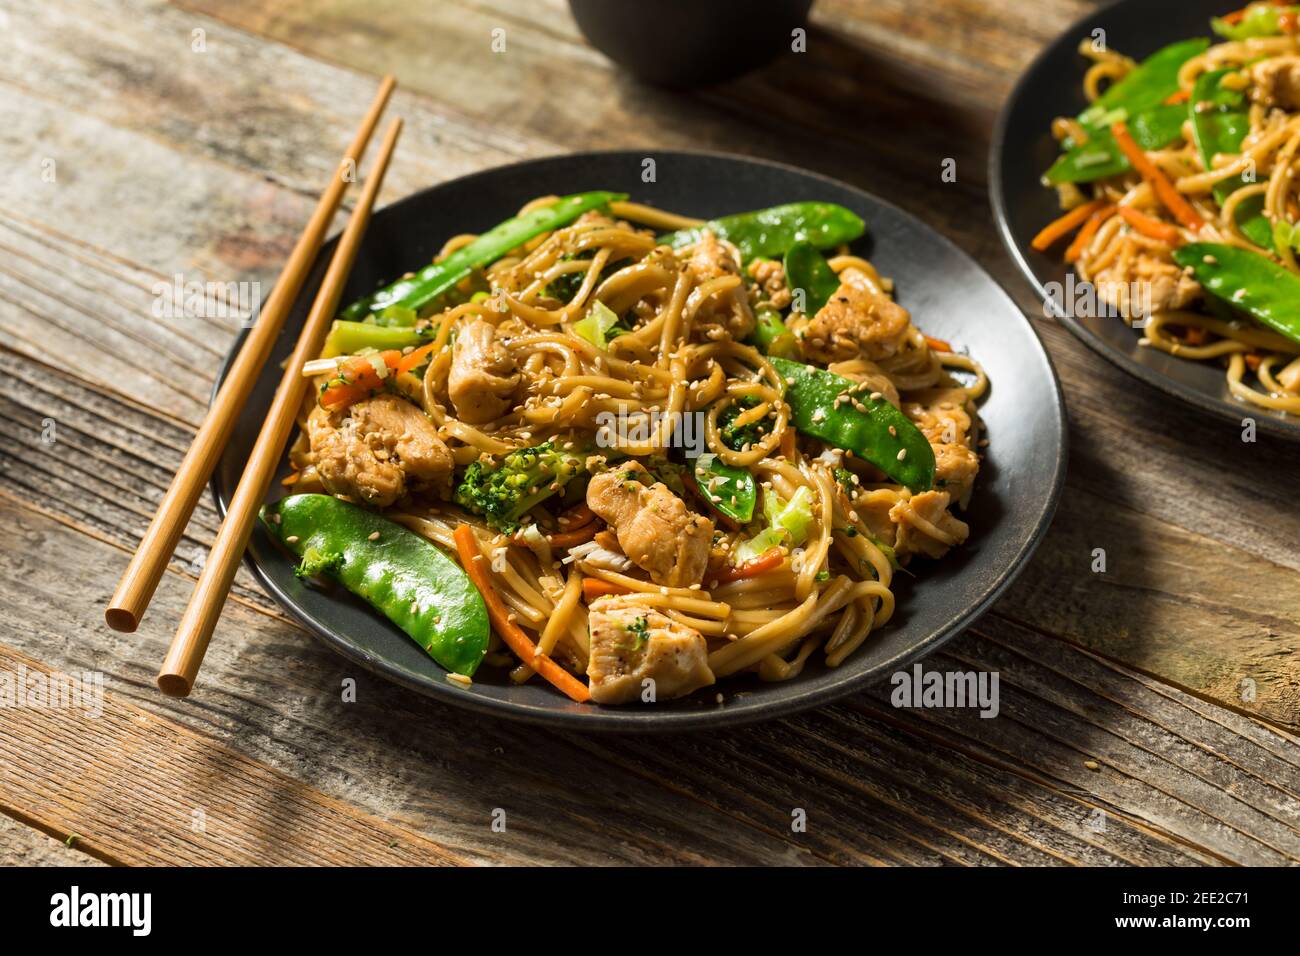 Homemade Asian Chicken Noodle Stir Fry with Fresh Veggies Stock Photo